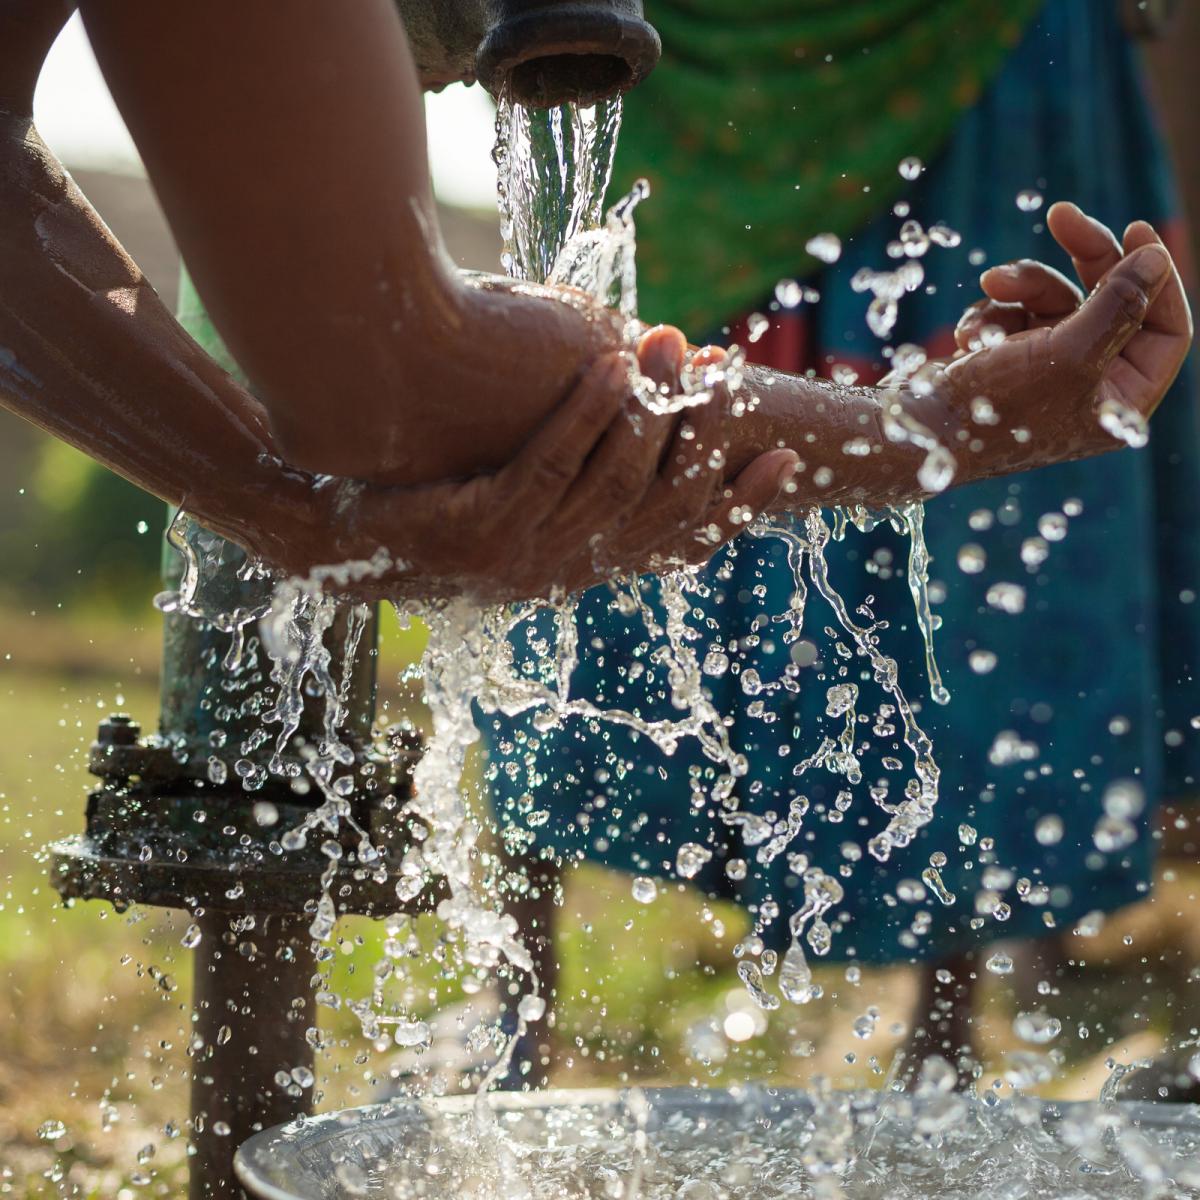 Hands being washed at an outdoor faucet.